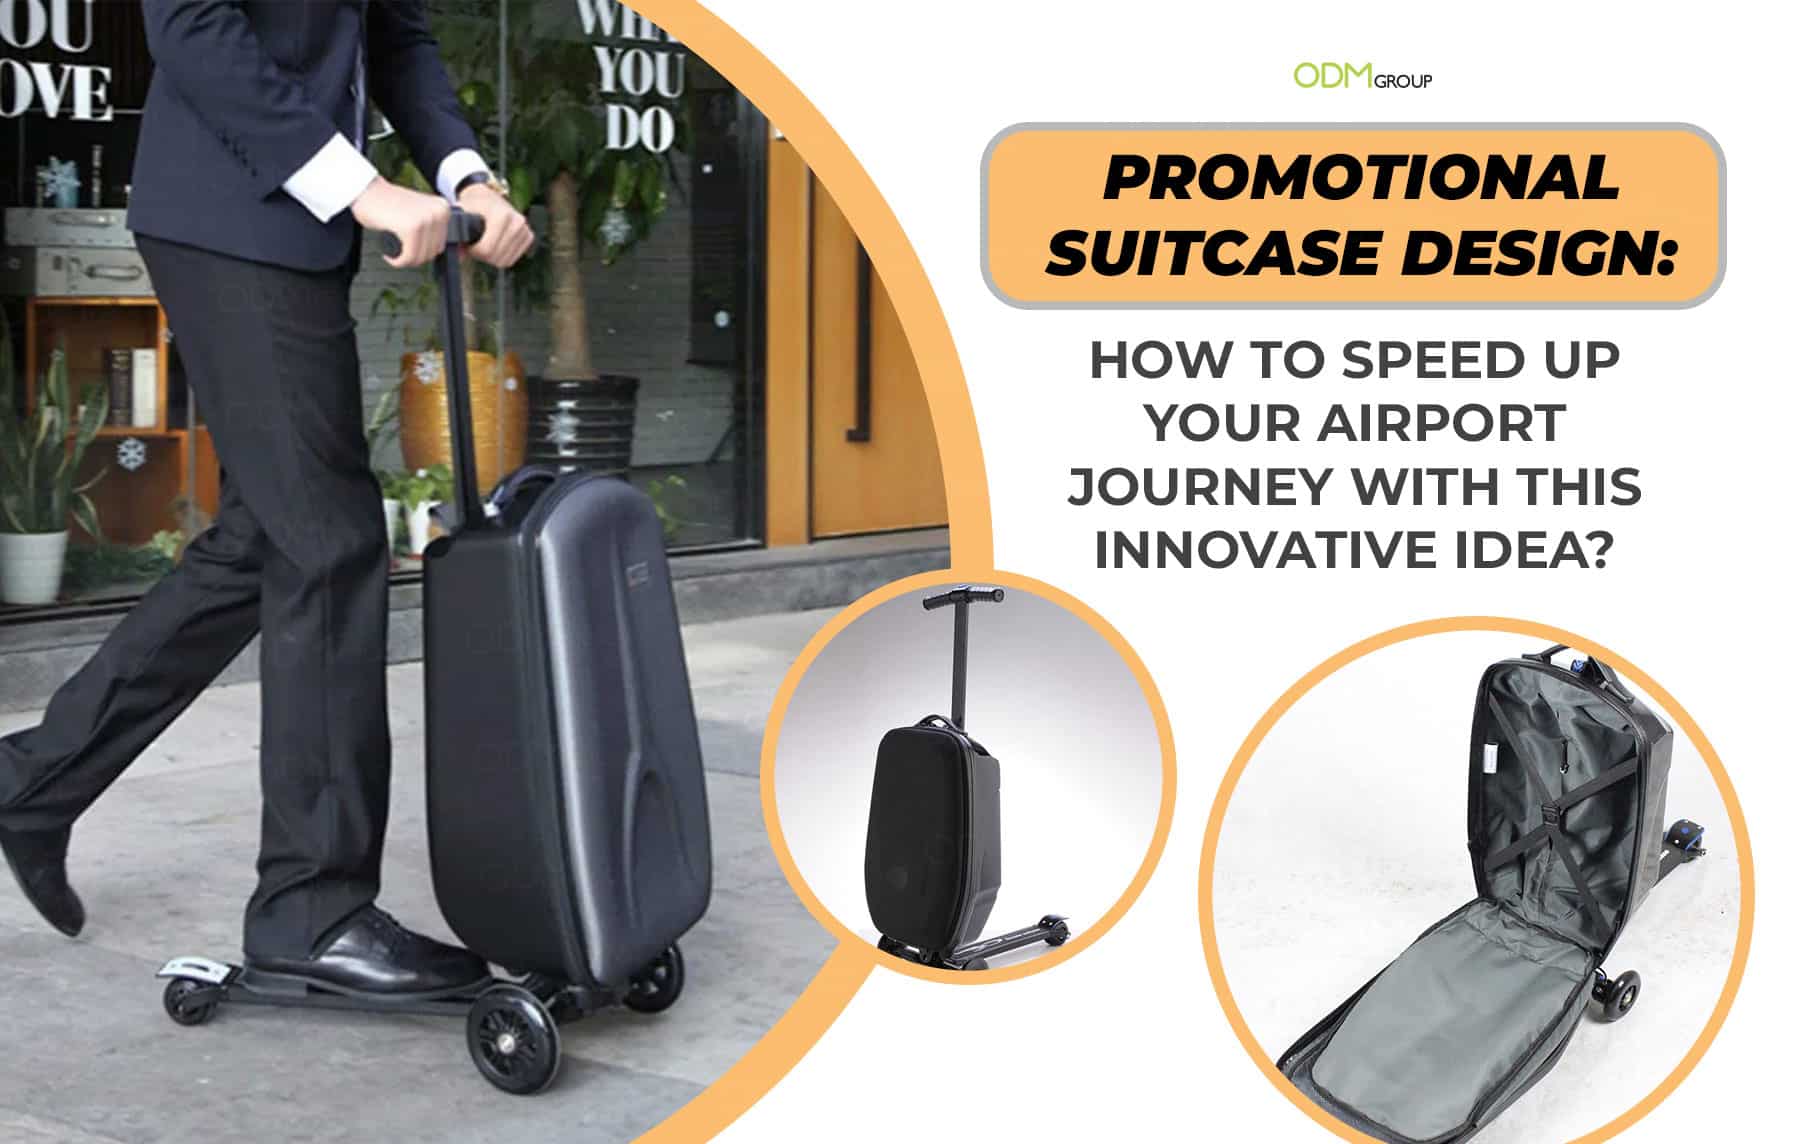 Speed Up Customers' Airport Journey w/ This Promotional Suitcase